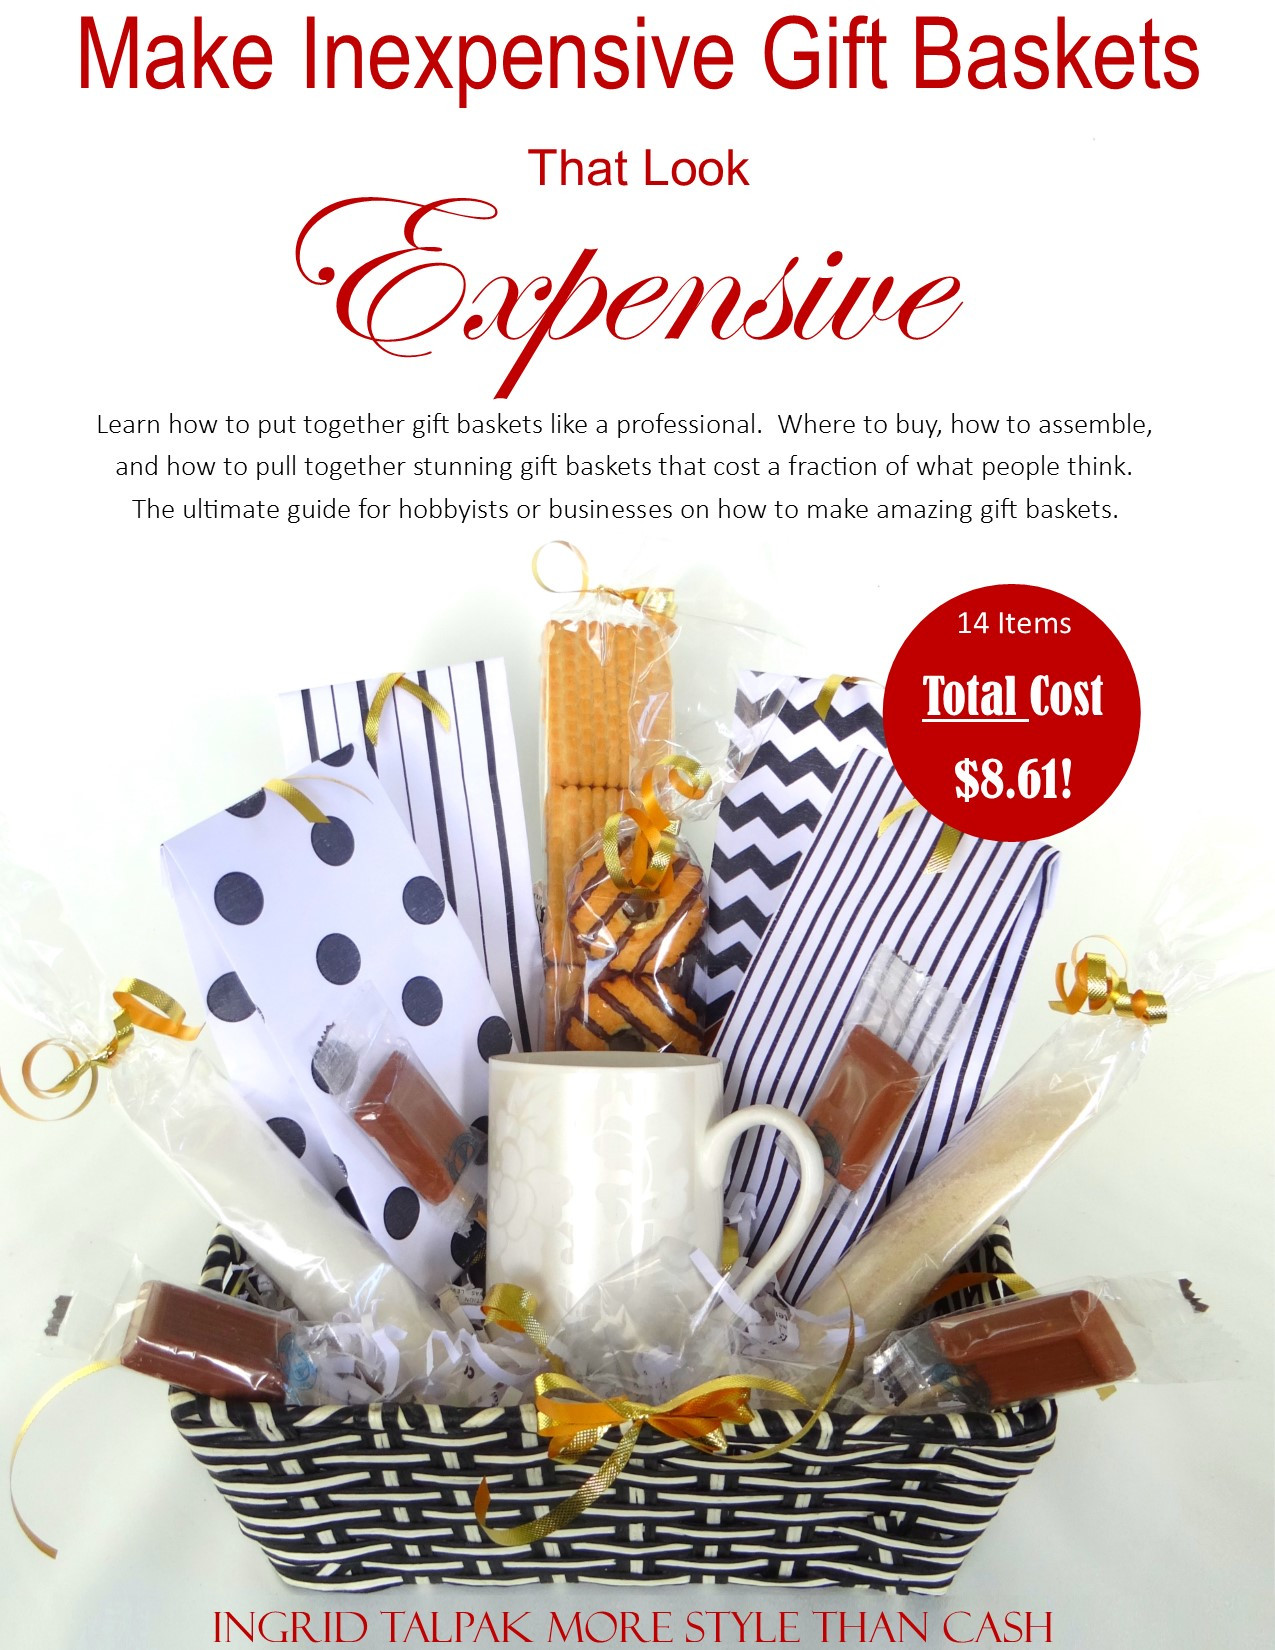 Cheap Gift Basket Ideas
 Make Inexpensive Gift Baskets that Look Expensive Book